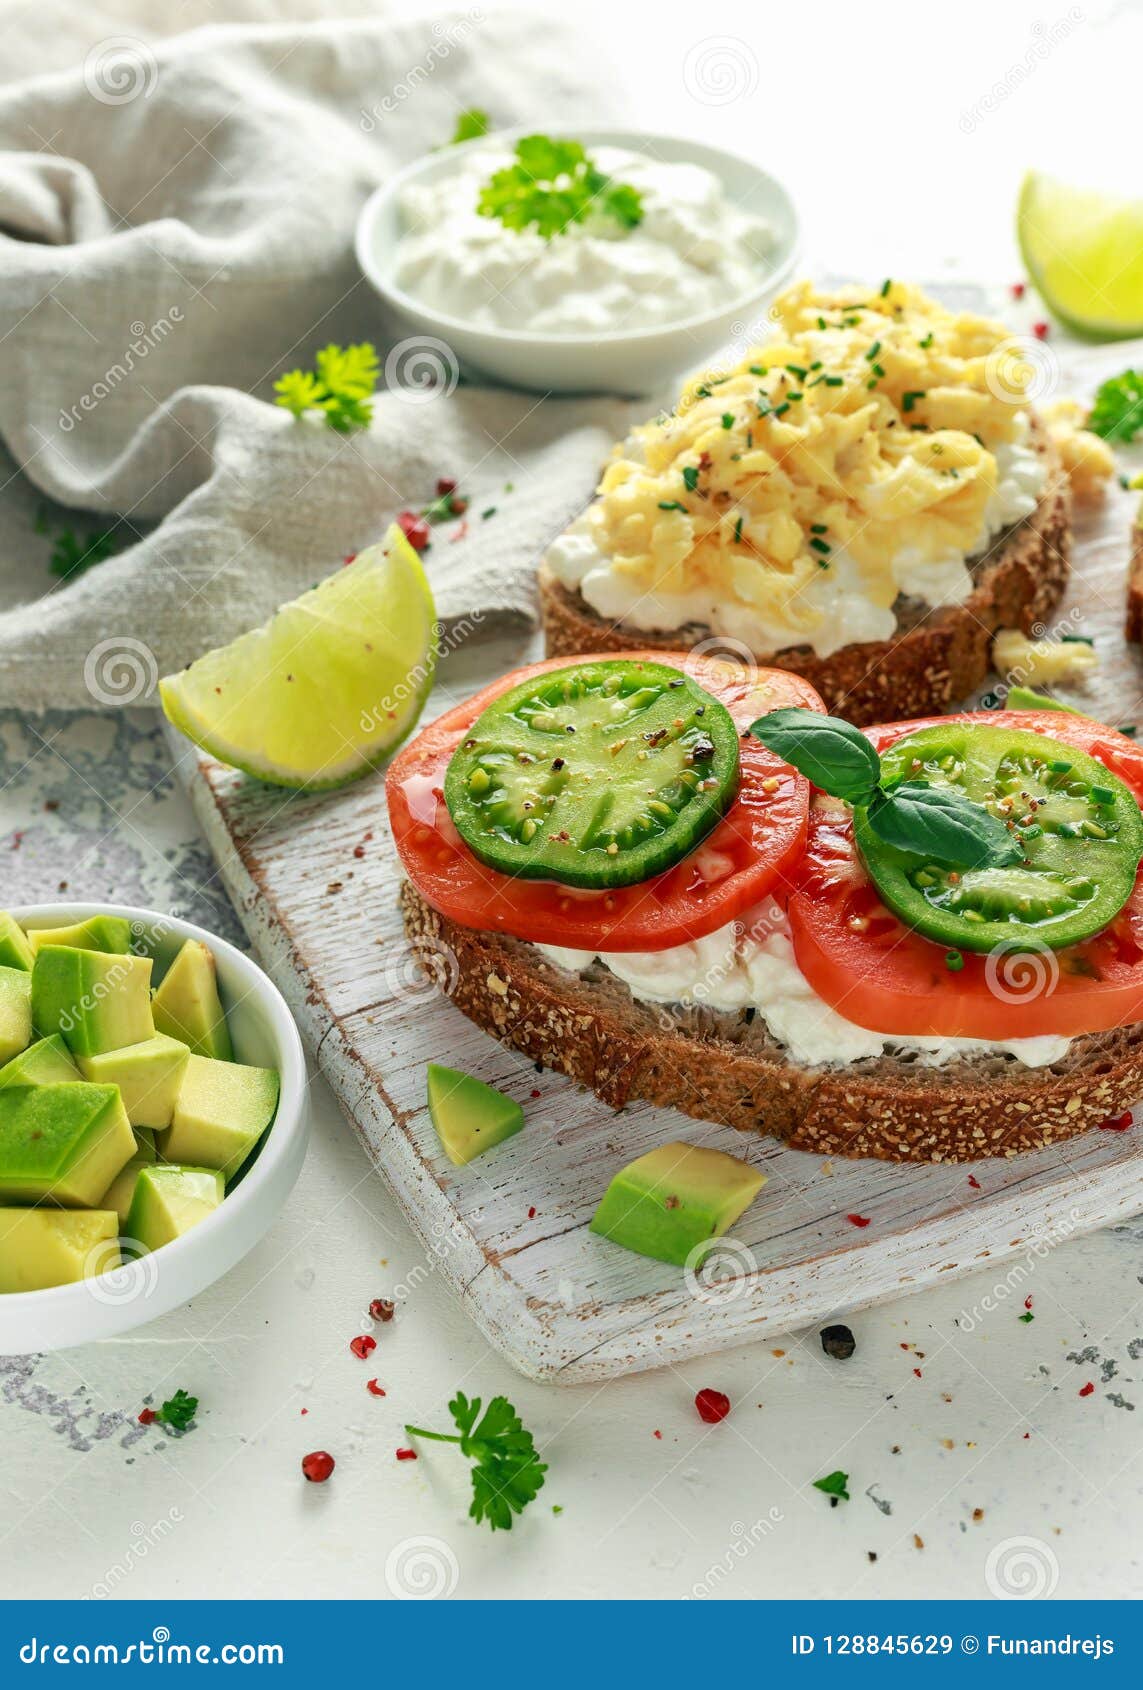 Vegetarian Healthy Bread Toasts With Cottage Cheese Heirloom